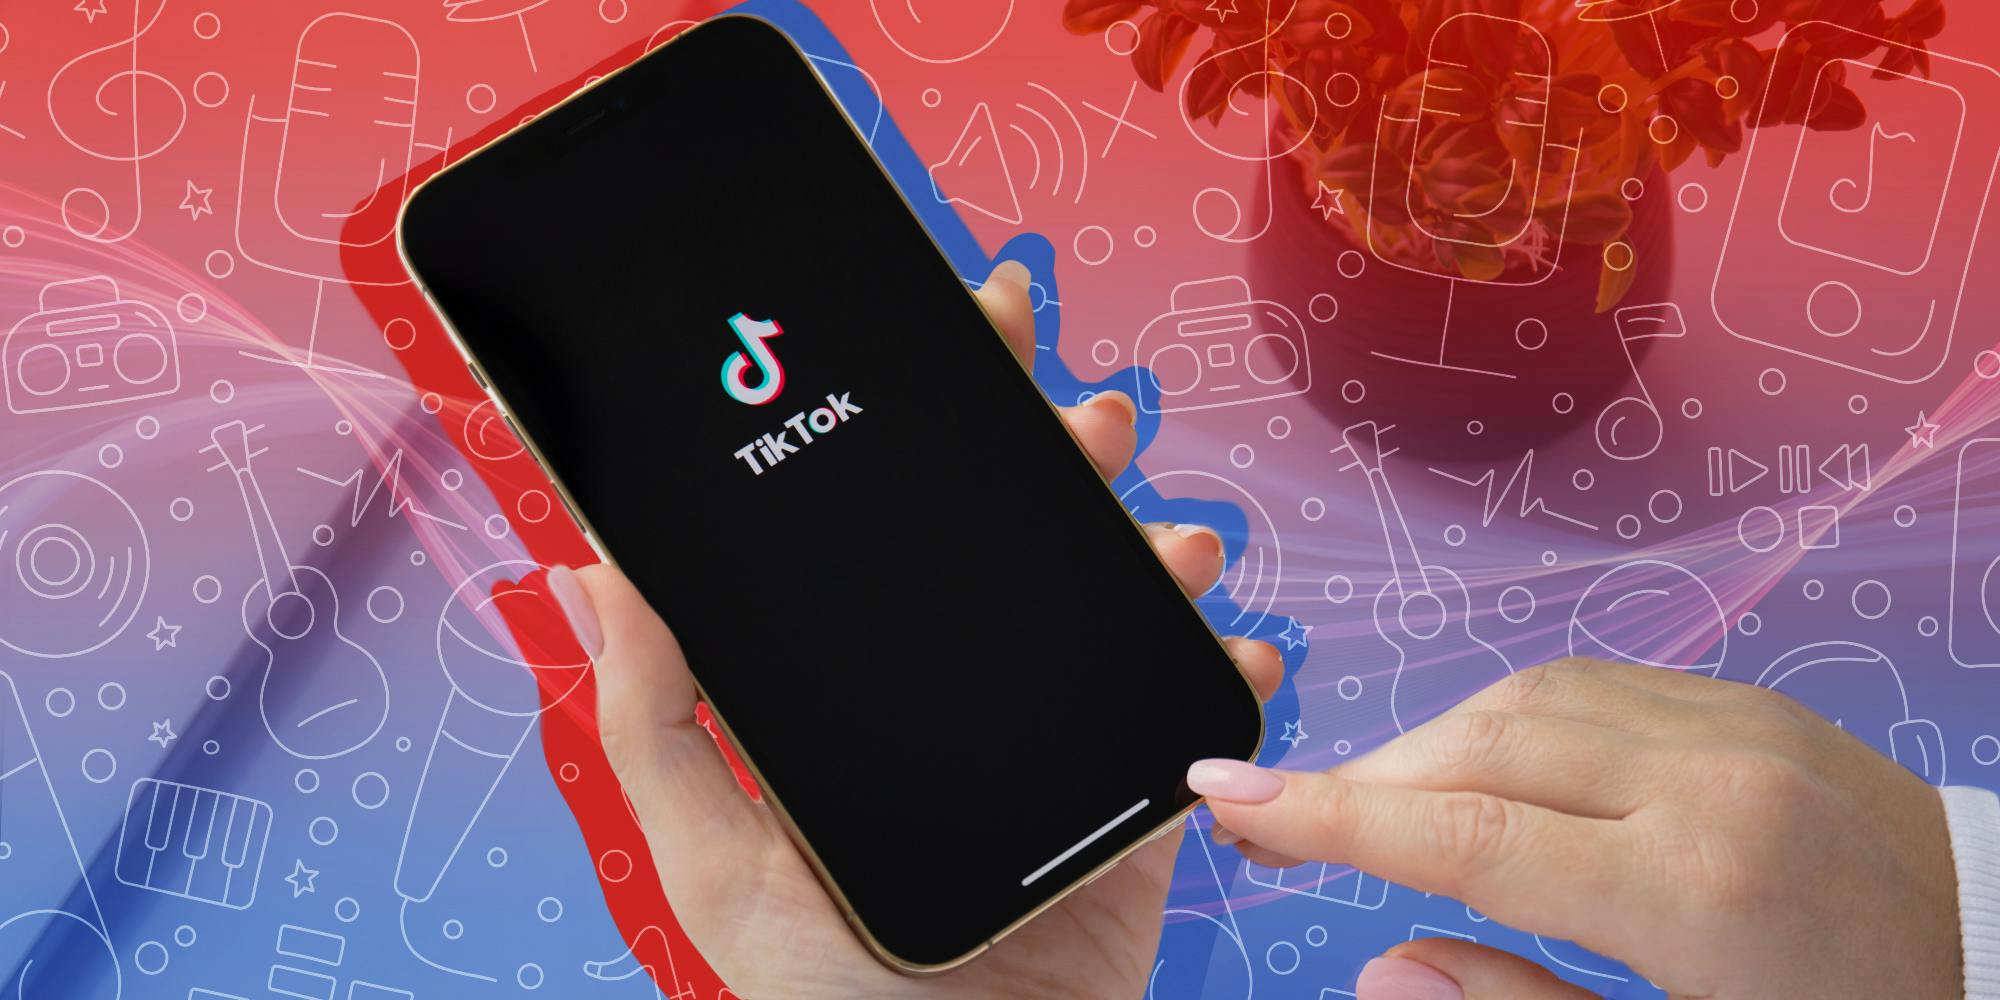 how to make a sound on tiktok - One hand holding a smartphone displaying the TikTok logo while the other hand is poised to touch the screen.